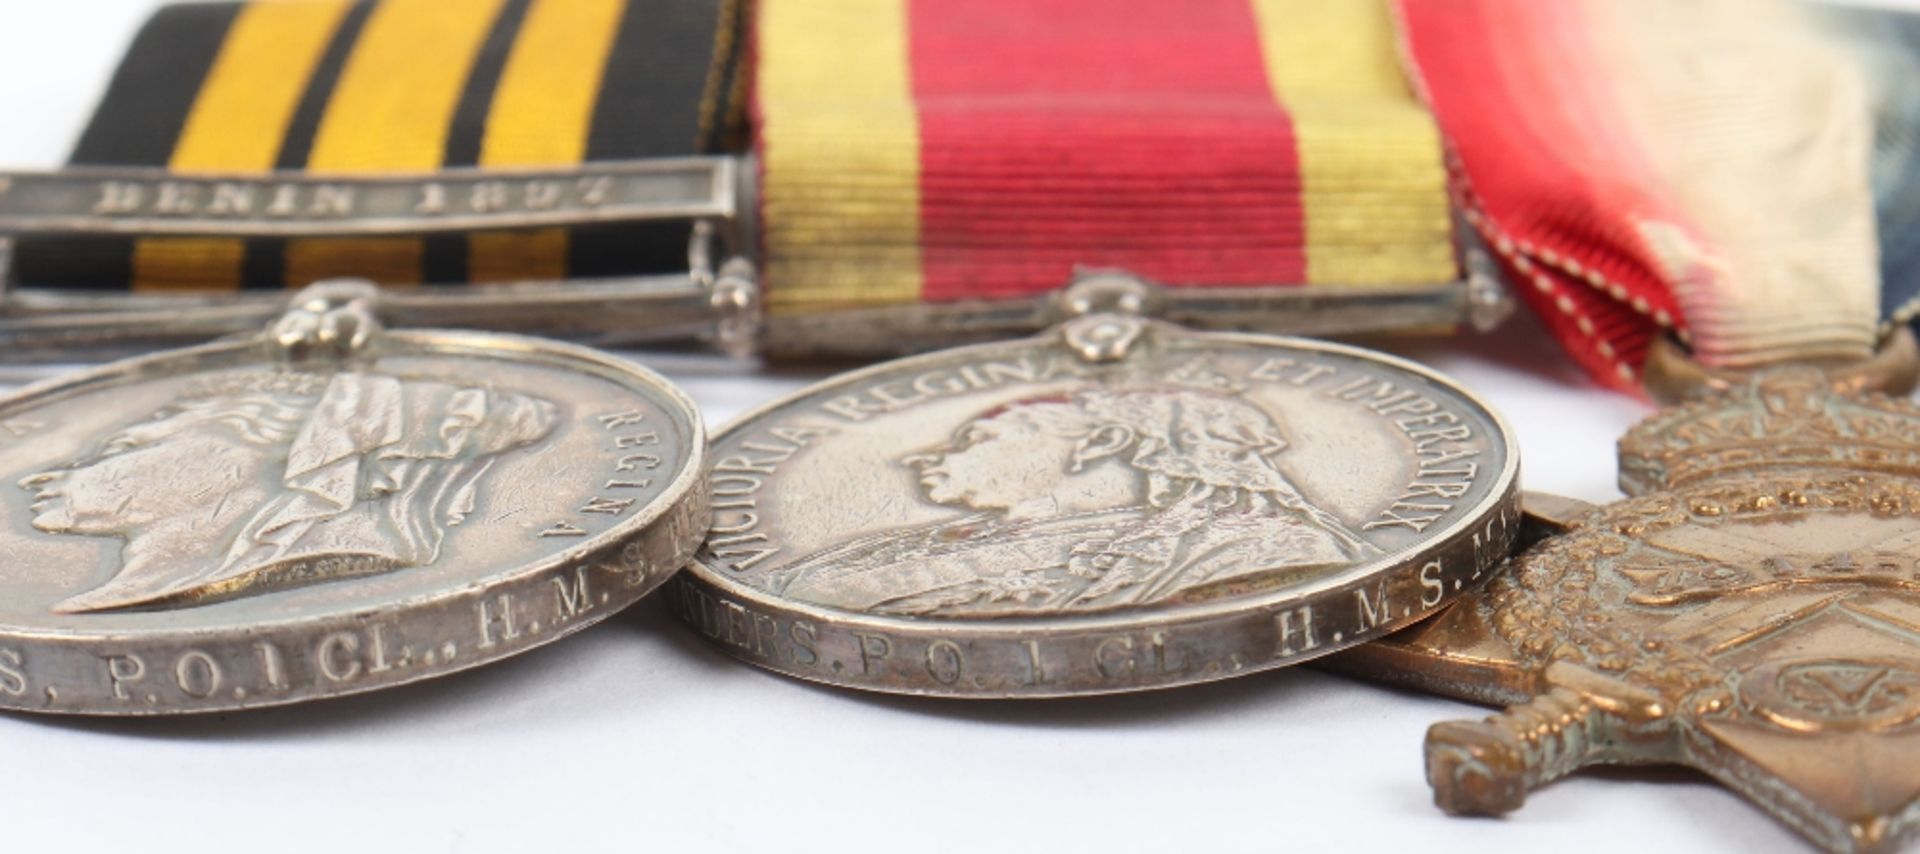 East West Africa, China 1900 and Great War Medal Group of Five Royal Navy - Image 6 of 12